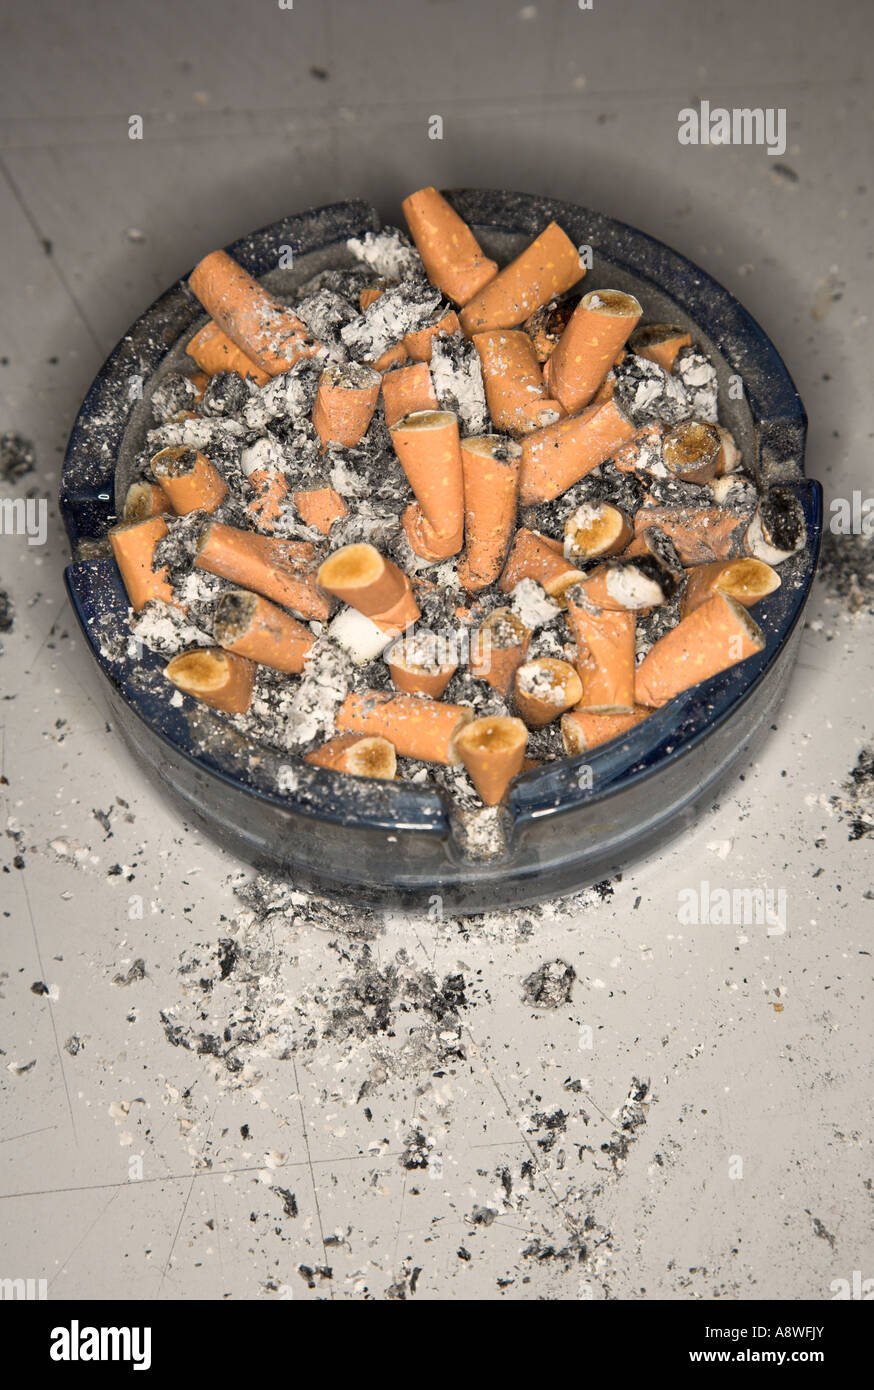 Ashtray spilling over with cigarette butts Stock Photo